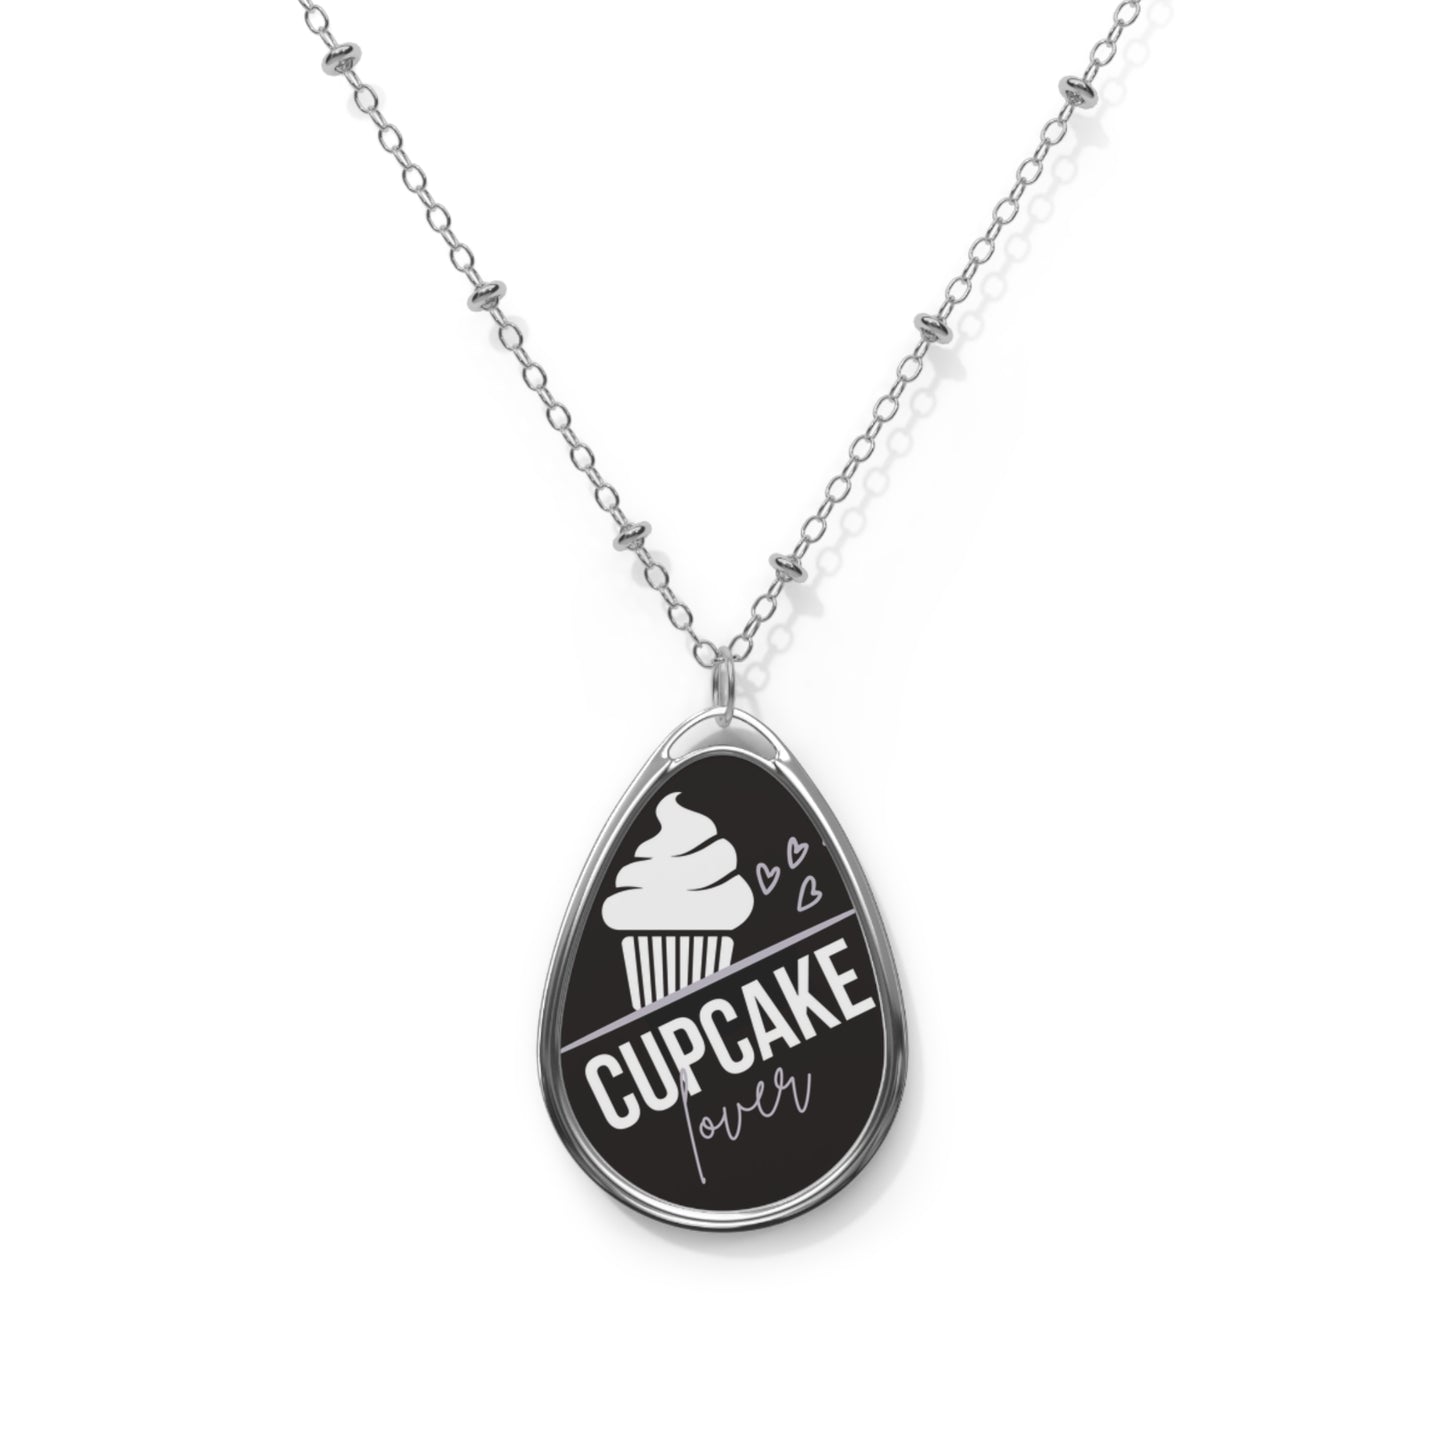 Cupcake Lover: Oval Necklace